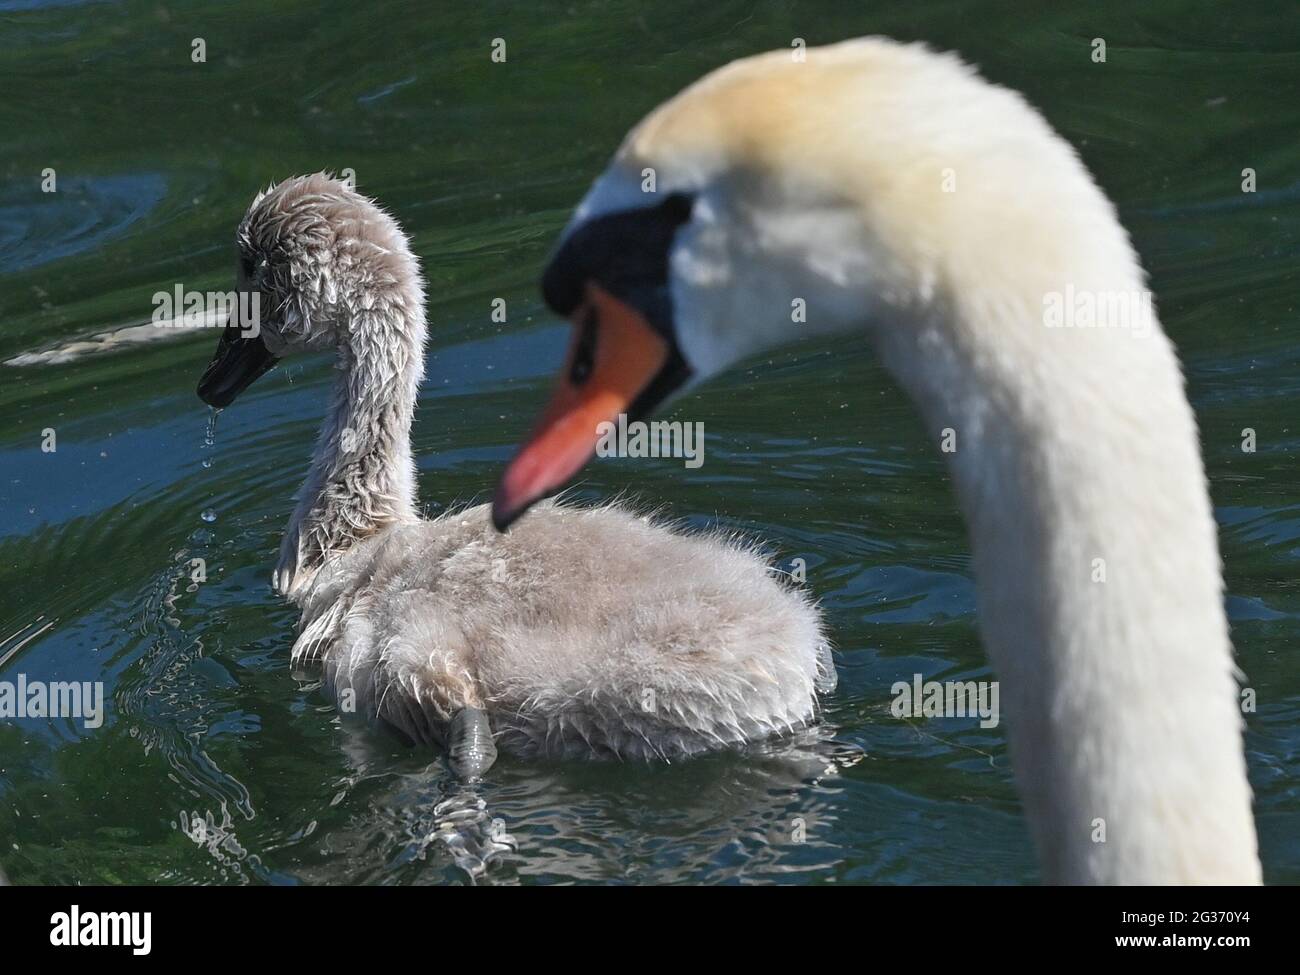 Bad Saarow, Germany. 14th June, 2021. A young mute swan swims next to a parent on Lake Scharmützel in the Oder-Spree district. The body of water in the Storkower Land, also called the Märkisches Meer by Fontane, is the largest lake in Brandenburg with about 1,500 hectares of water surface. Credit: Patrick Pleul/dpa-Zentralbild/ZB/dpa/Alamy Live News Stock Photo